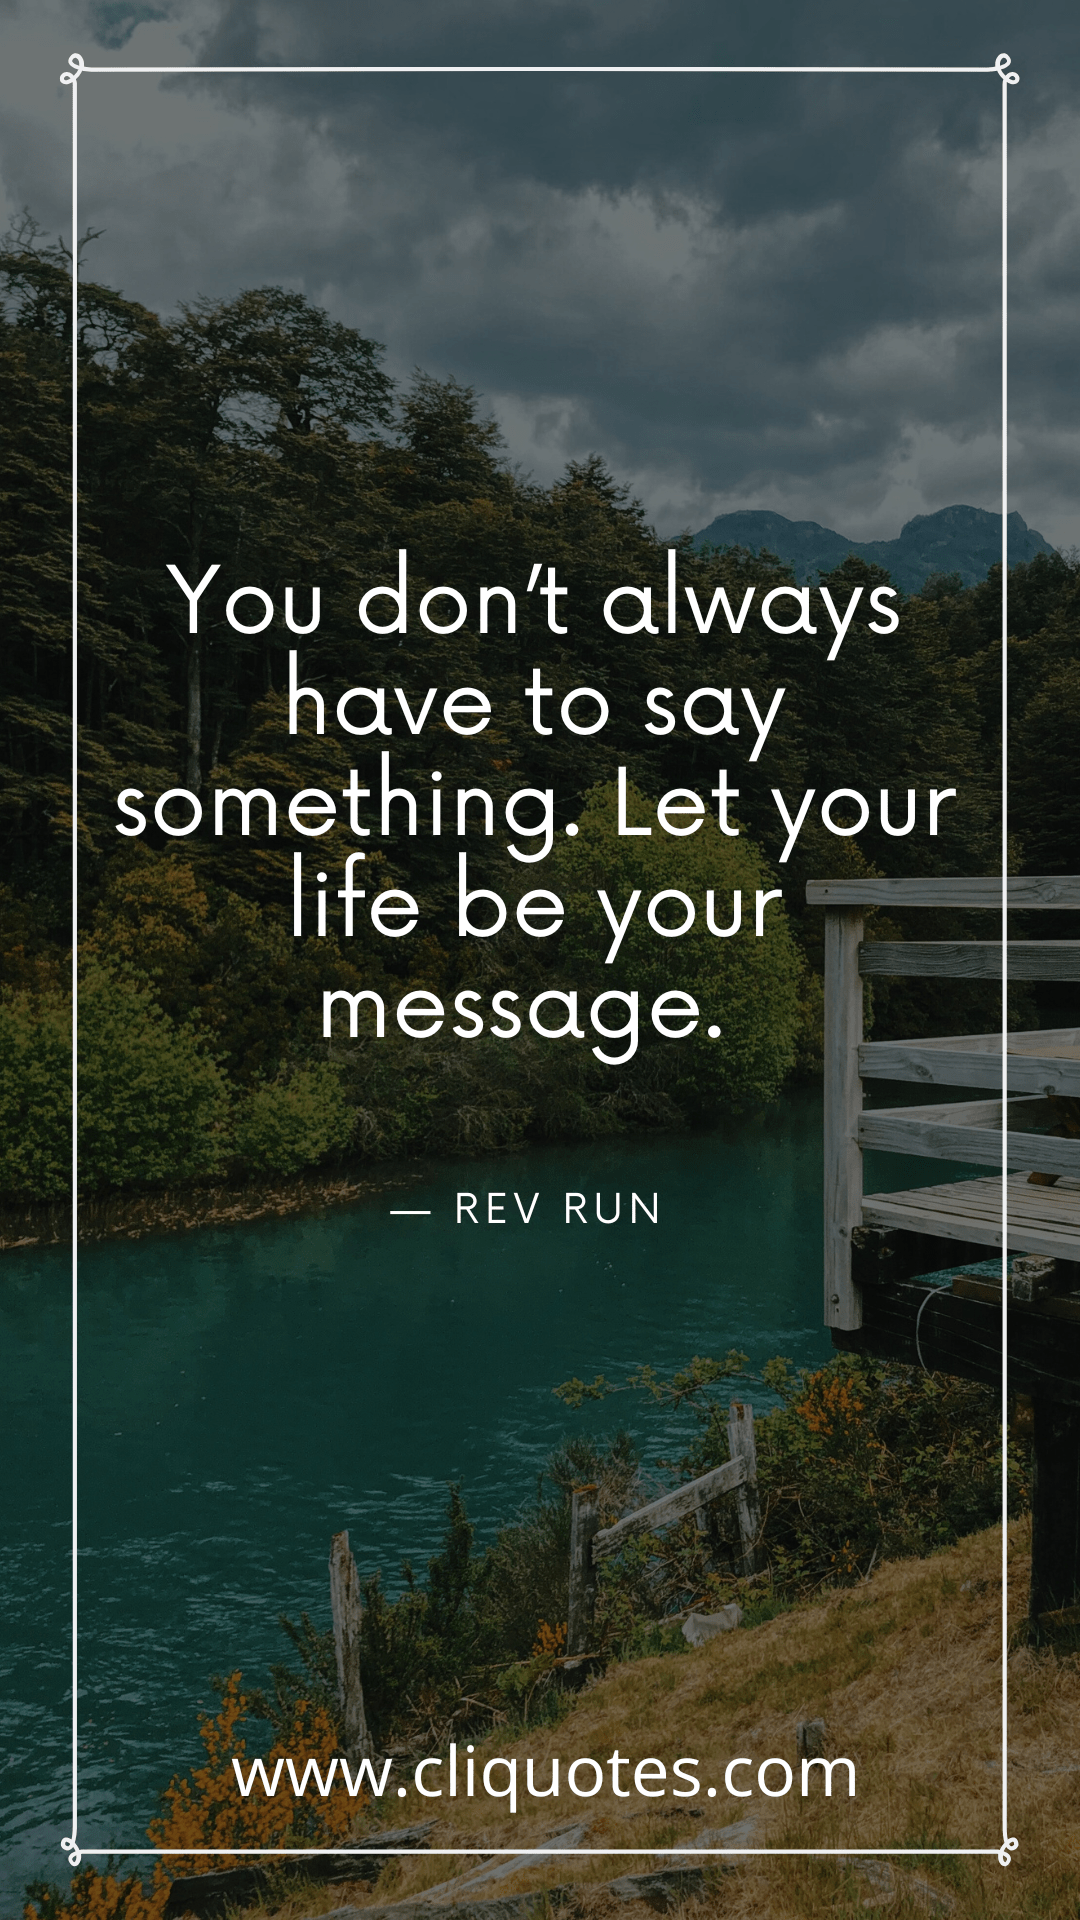 You don’t always have to say something. Let your life be your message. — REV RUN